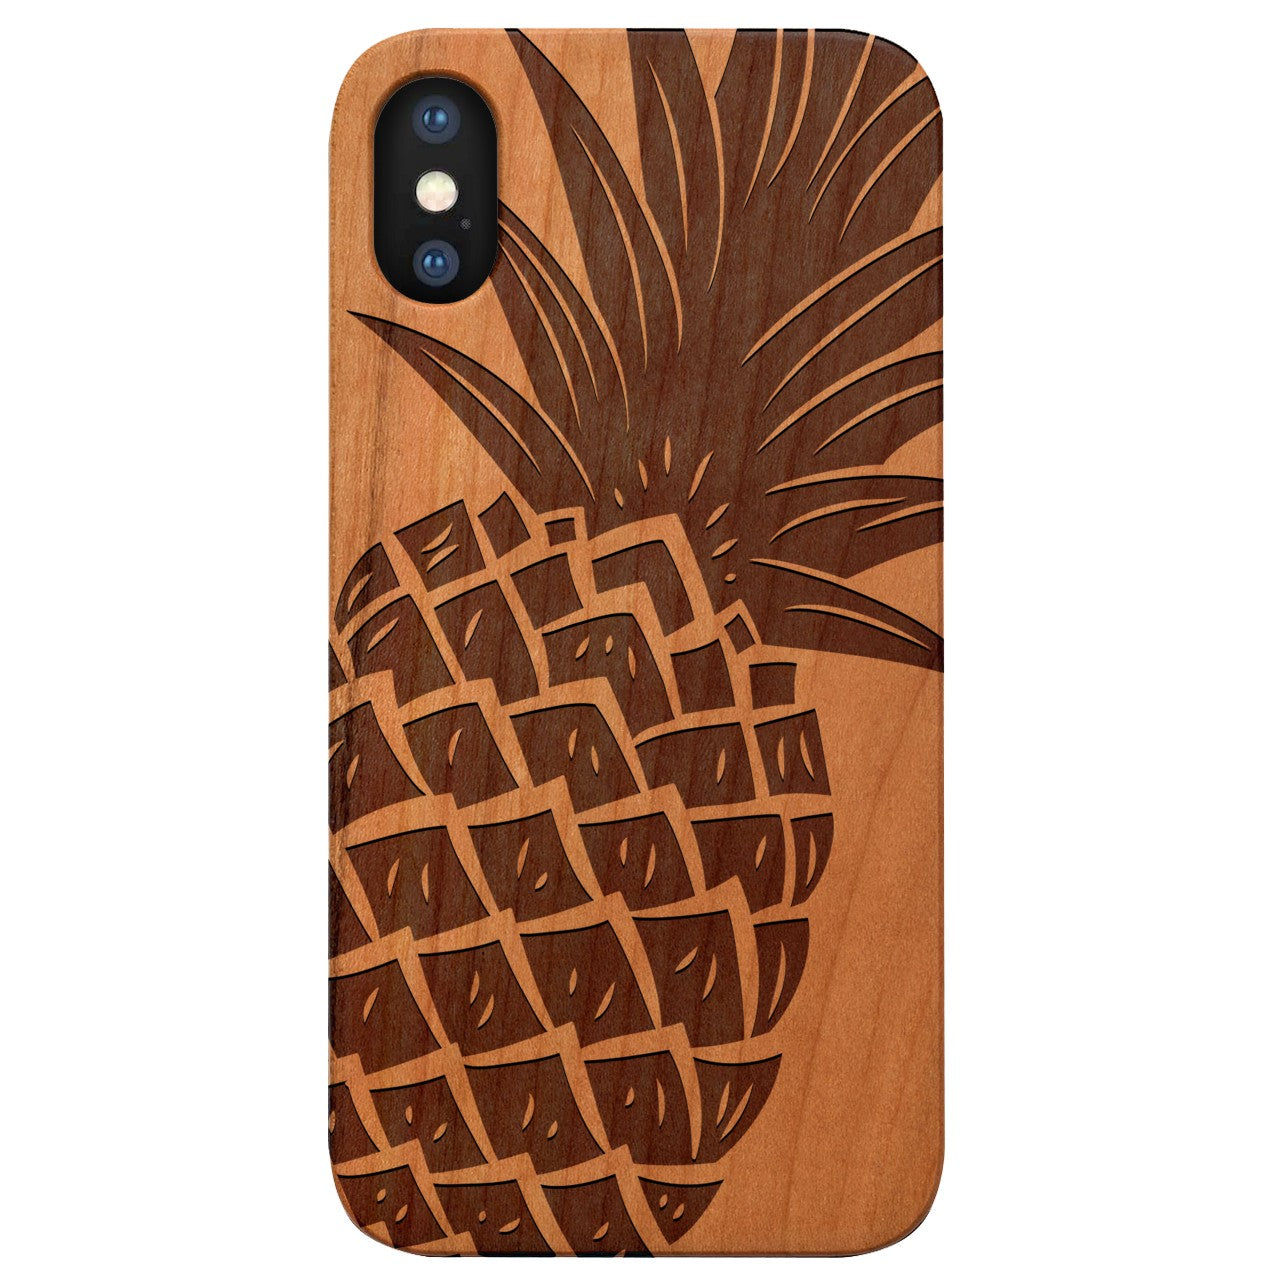  Pineapple - Engraved - Wooden Phone Case - IPhone 13 Models